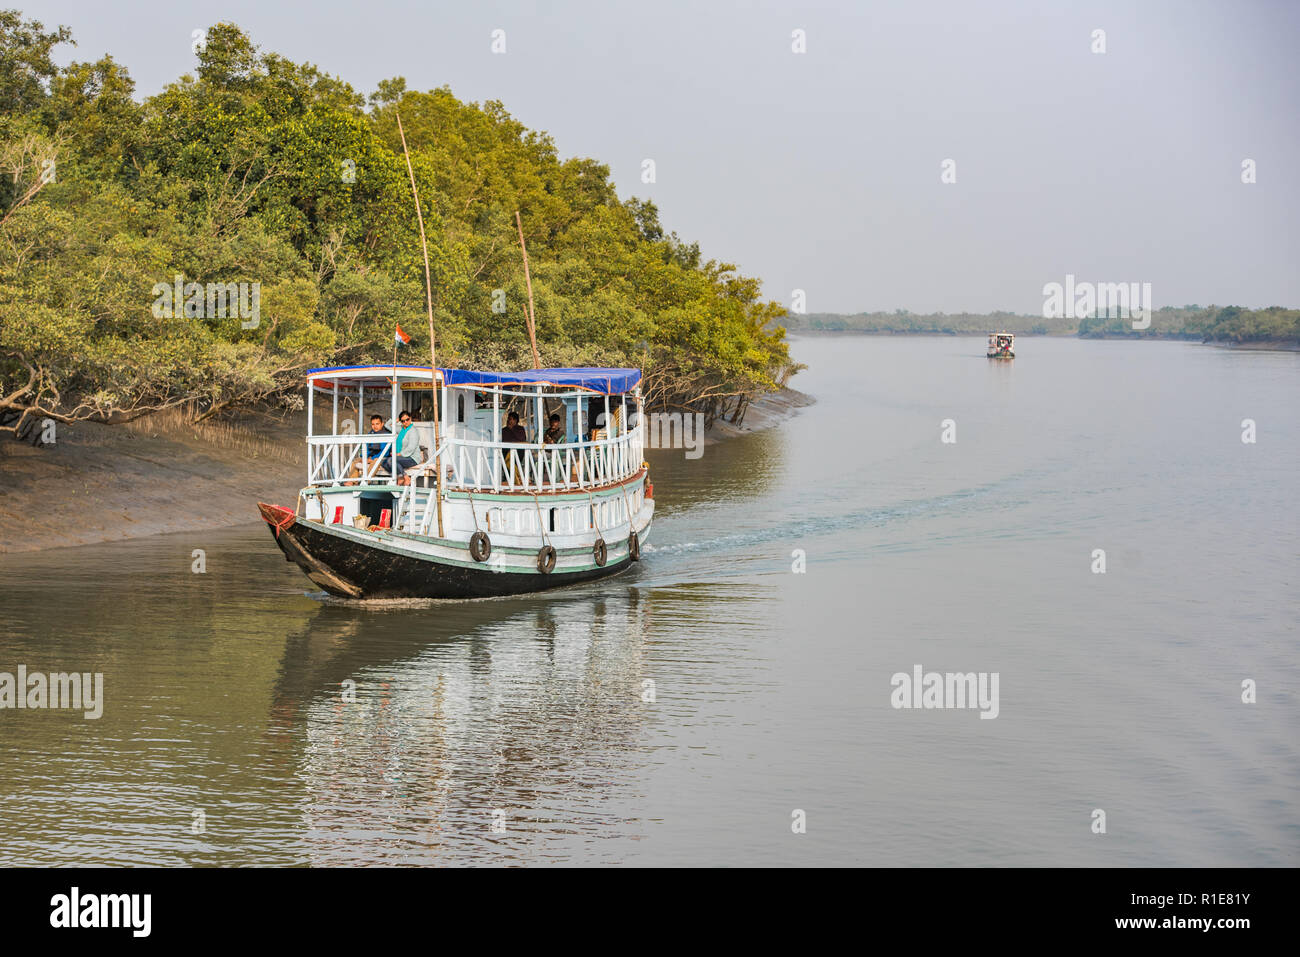 A passenger ferry in the Sundarbans, West Bengal, India Stock Photo